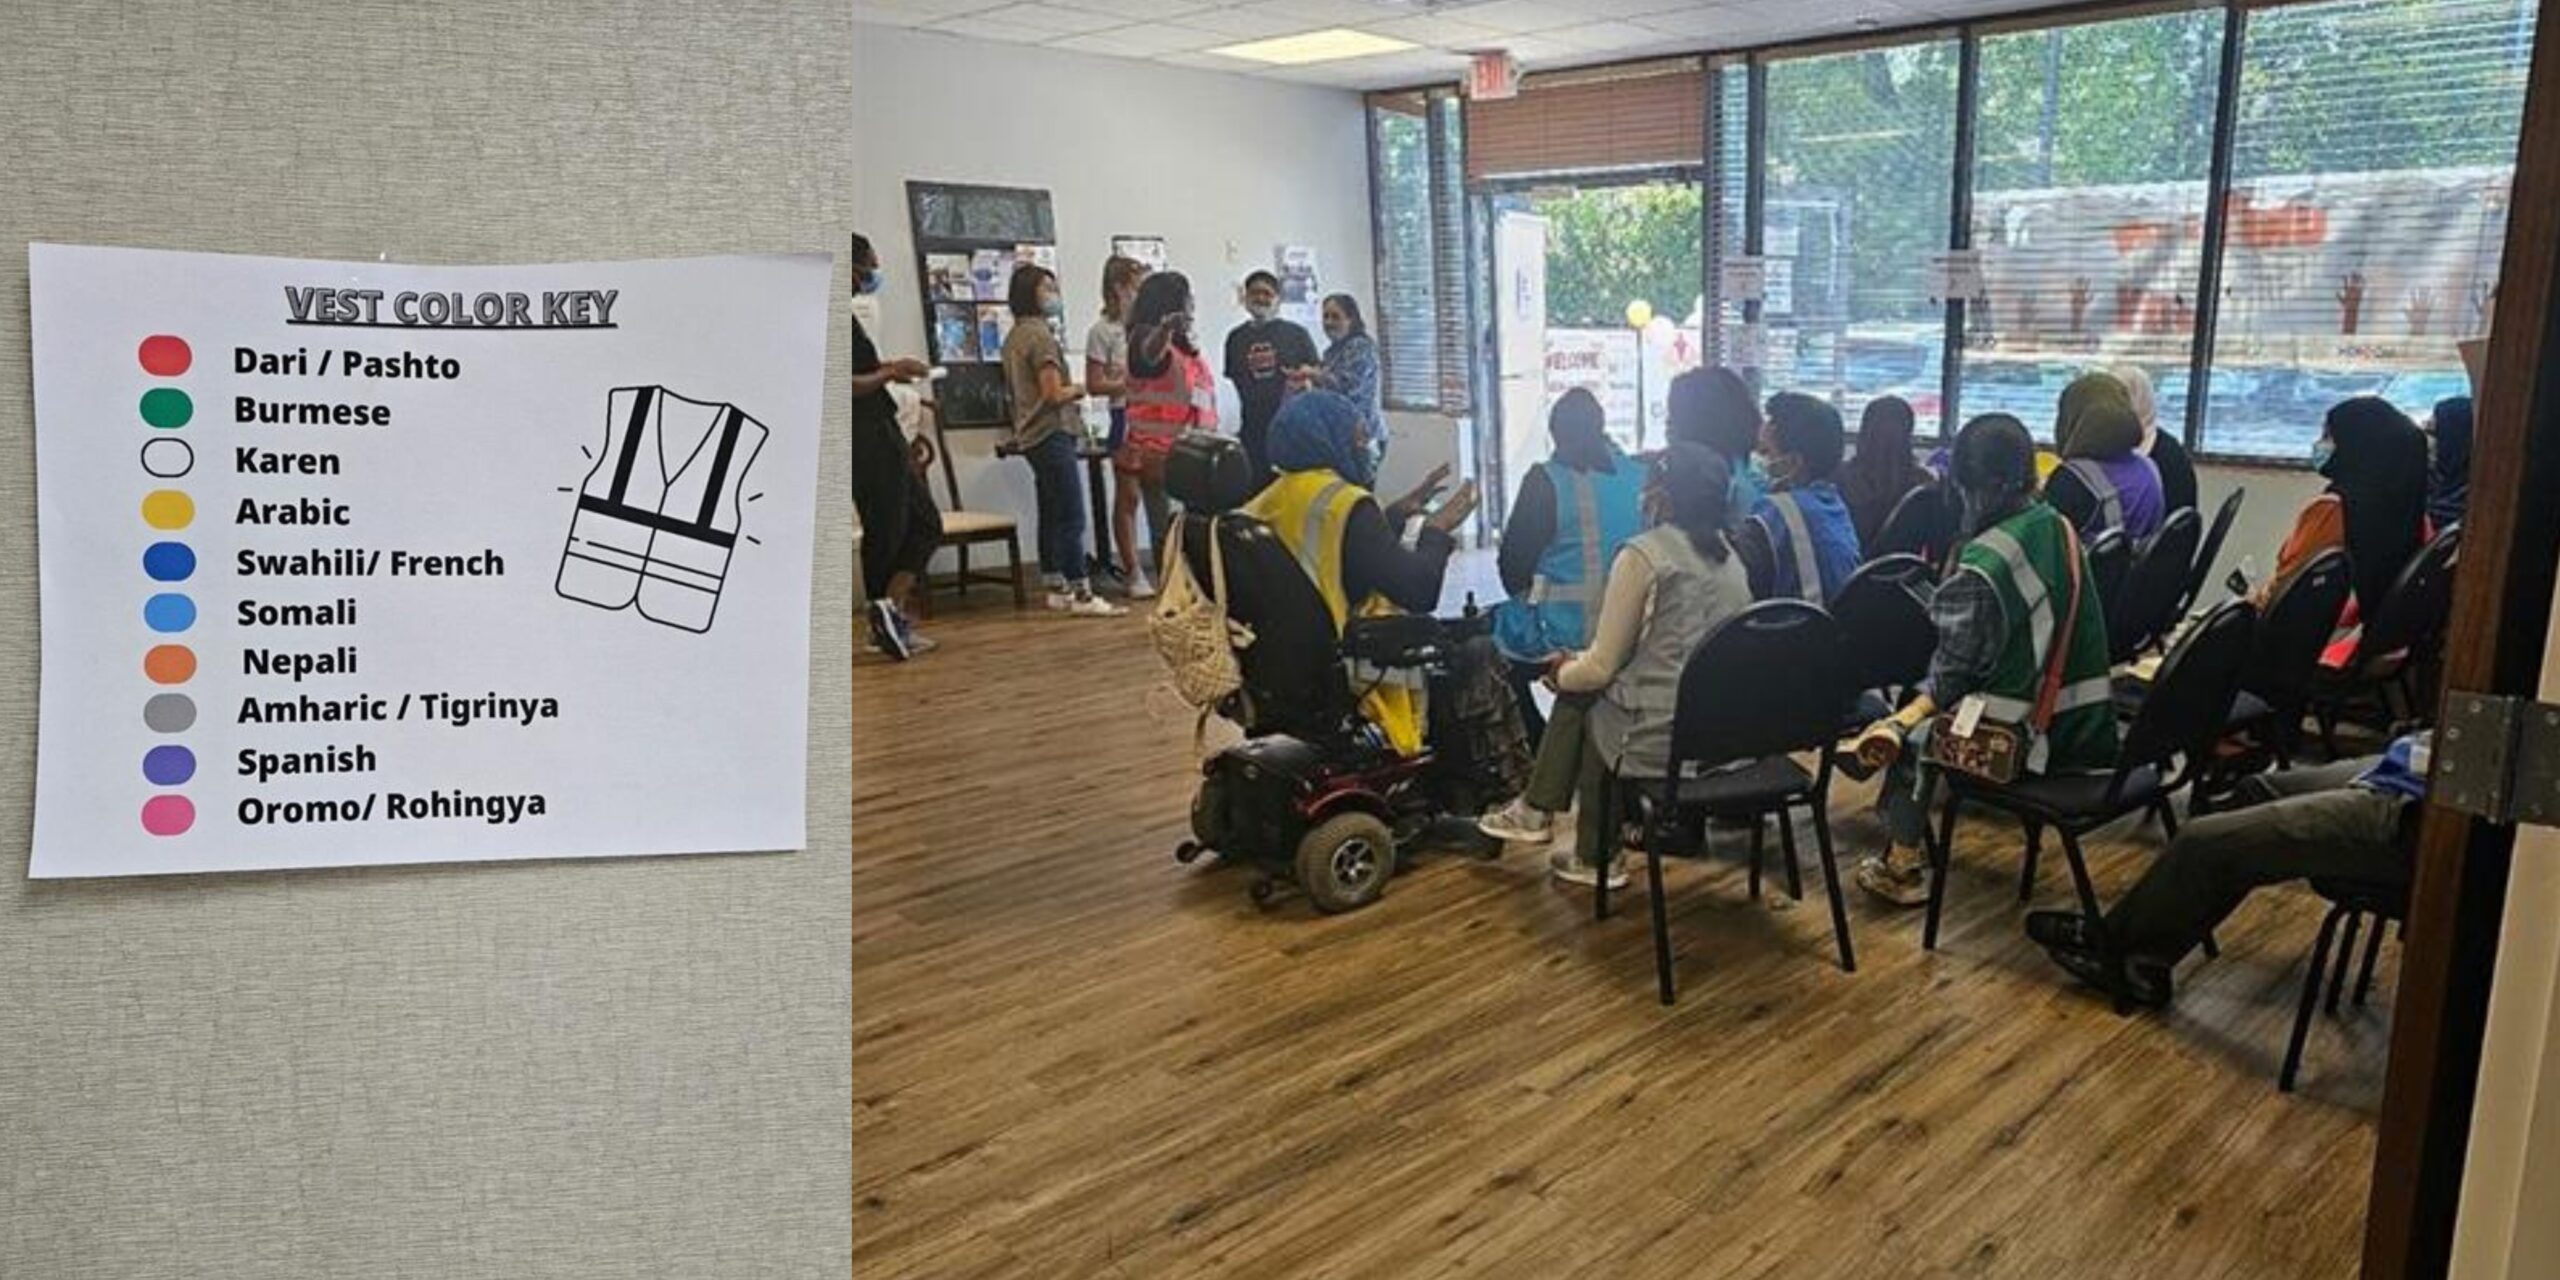 Left photo features a language guide is pinned to the wall at a health event in Georgia. The languages featured are Dari, Pashto, Burmese, Karen, Arabic, Swahili, French, Somali, Nepali, Amharic, Tigrinya, Spanish, Oromo, Rohingya. Right photo features attendees sit in four rows of chairs and wait to be matched with an interpreter at a health event.